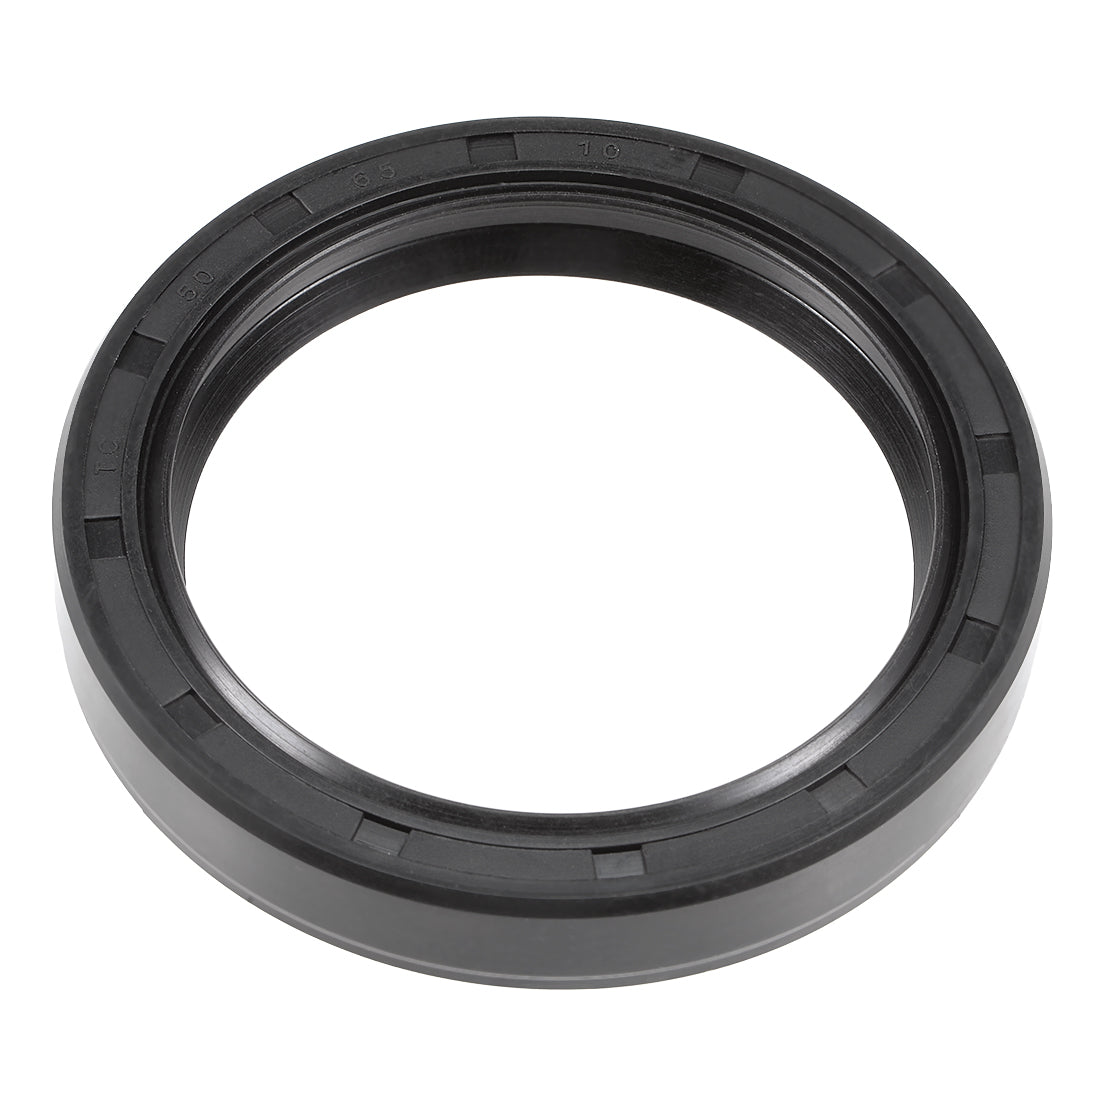 uxcell Uxcell Oil Seal, TC 50mm x 65mm x 10mm, Nitrile Rubber Cover Double Lip